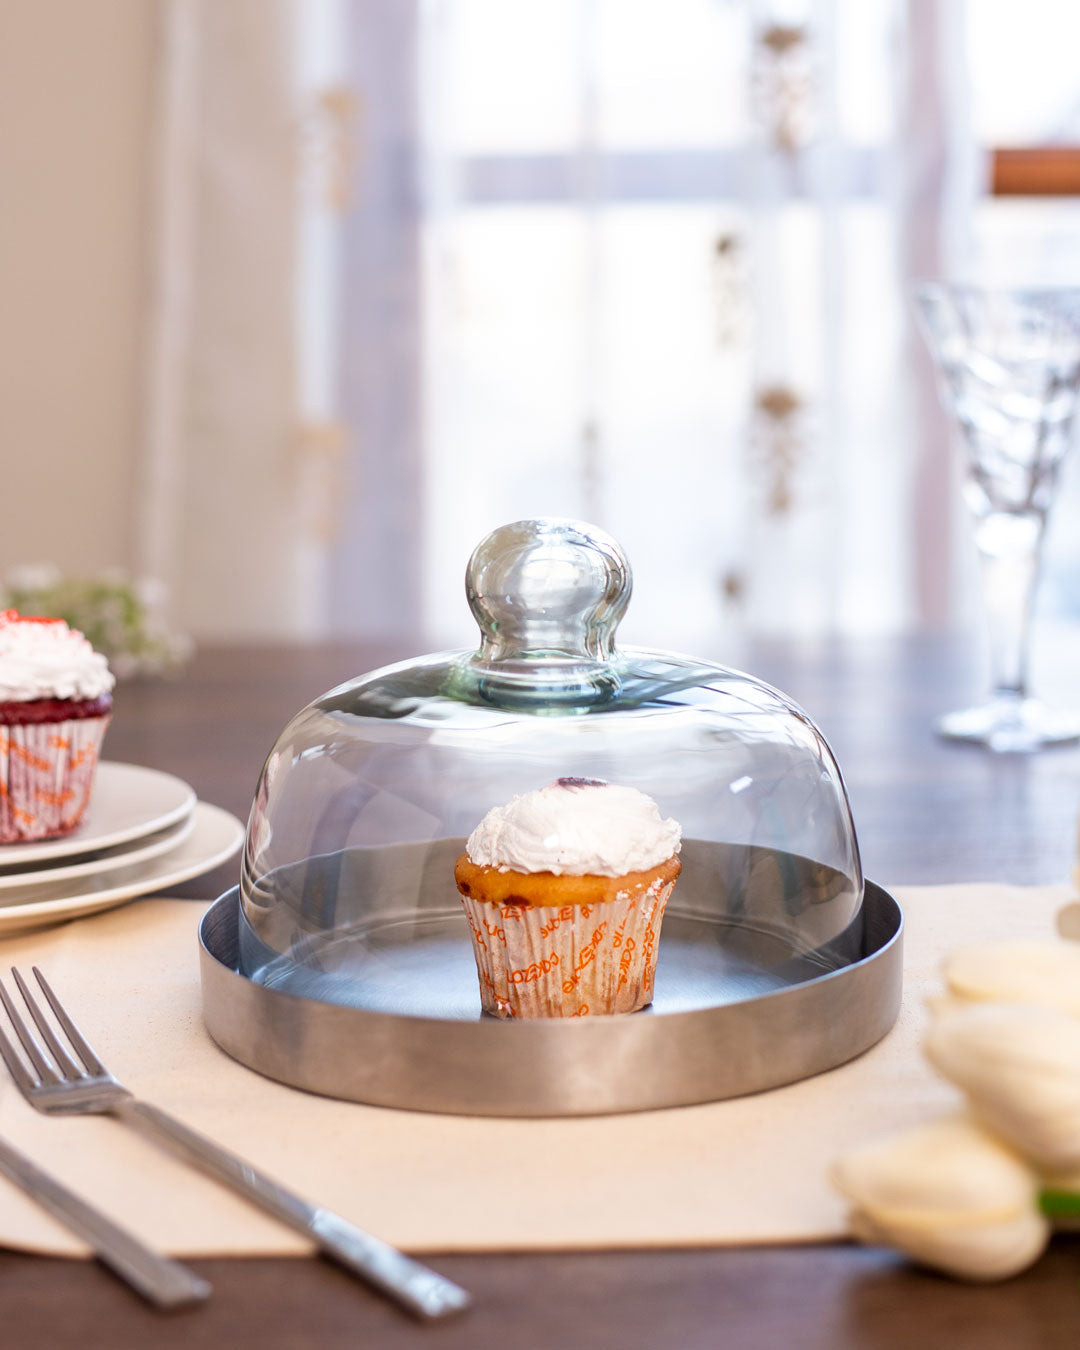 Silver Stainless Steel Cake Plate with Glass Dome